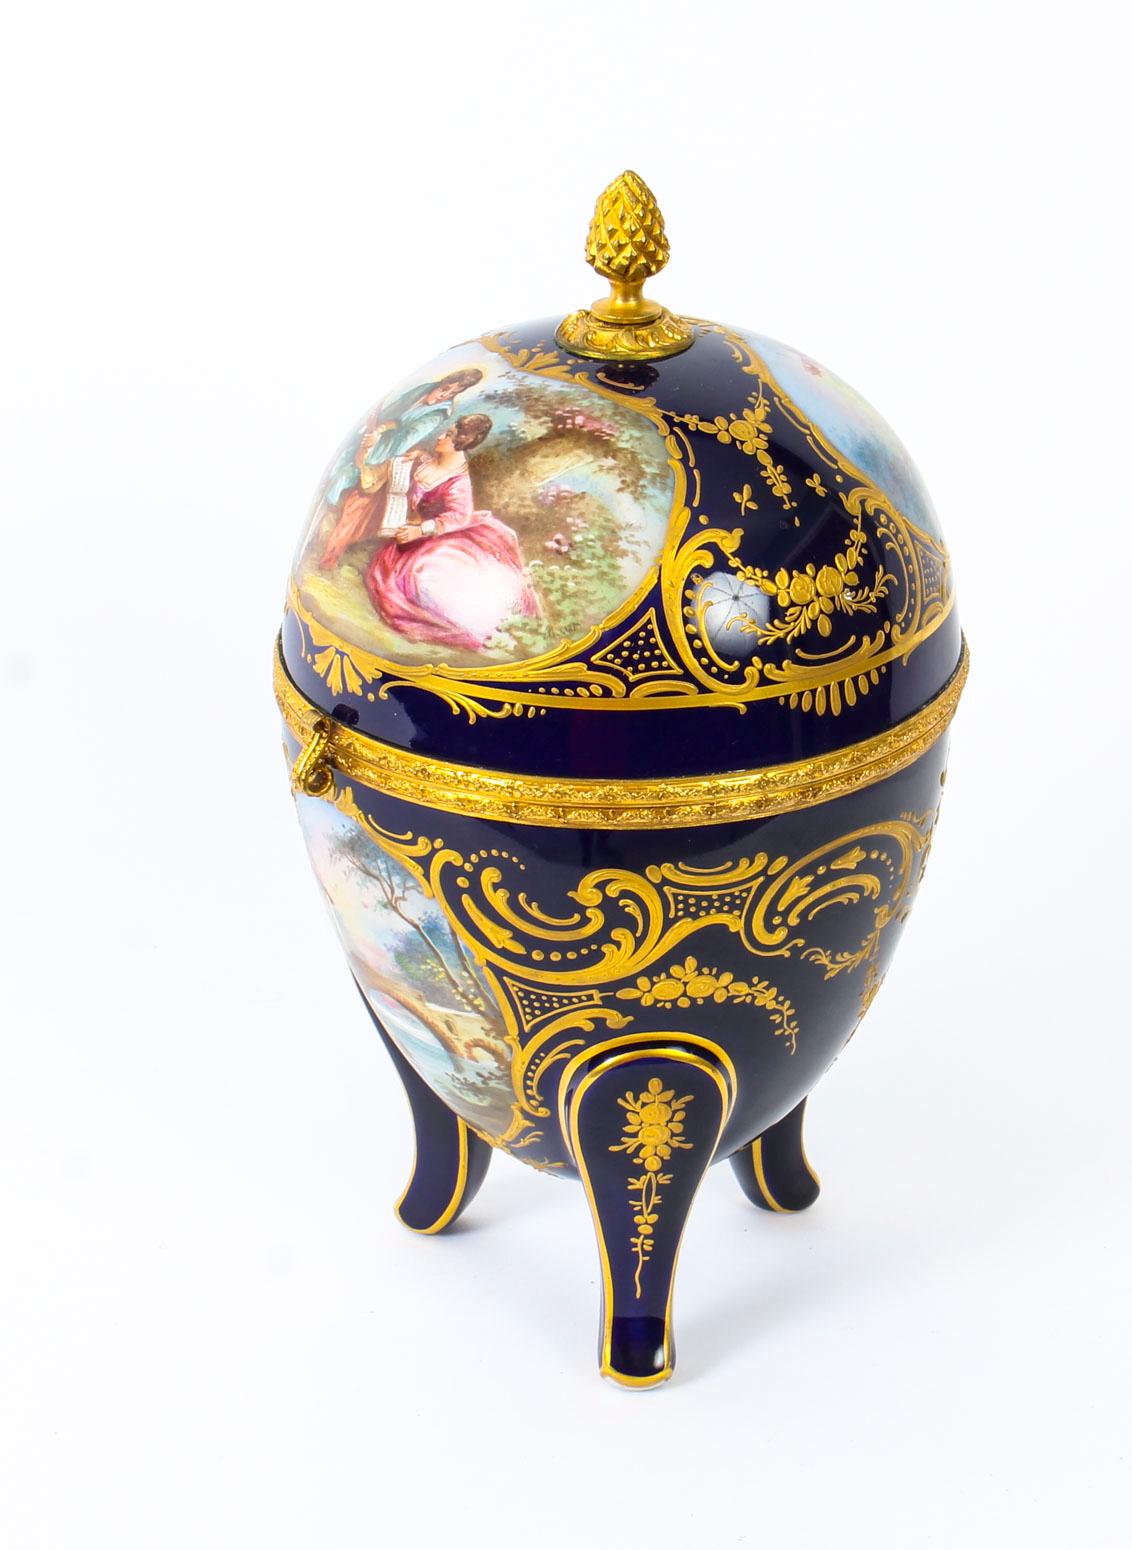 This is an exquisite French antique ormolu-mounted Sèvres Porcelain casket, circa 1880 in date.
 
This wonderful large casket is ovoid in shape and has a stunning hinged lid with a pineapple finial featuring two beautiful hand painted romantic